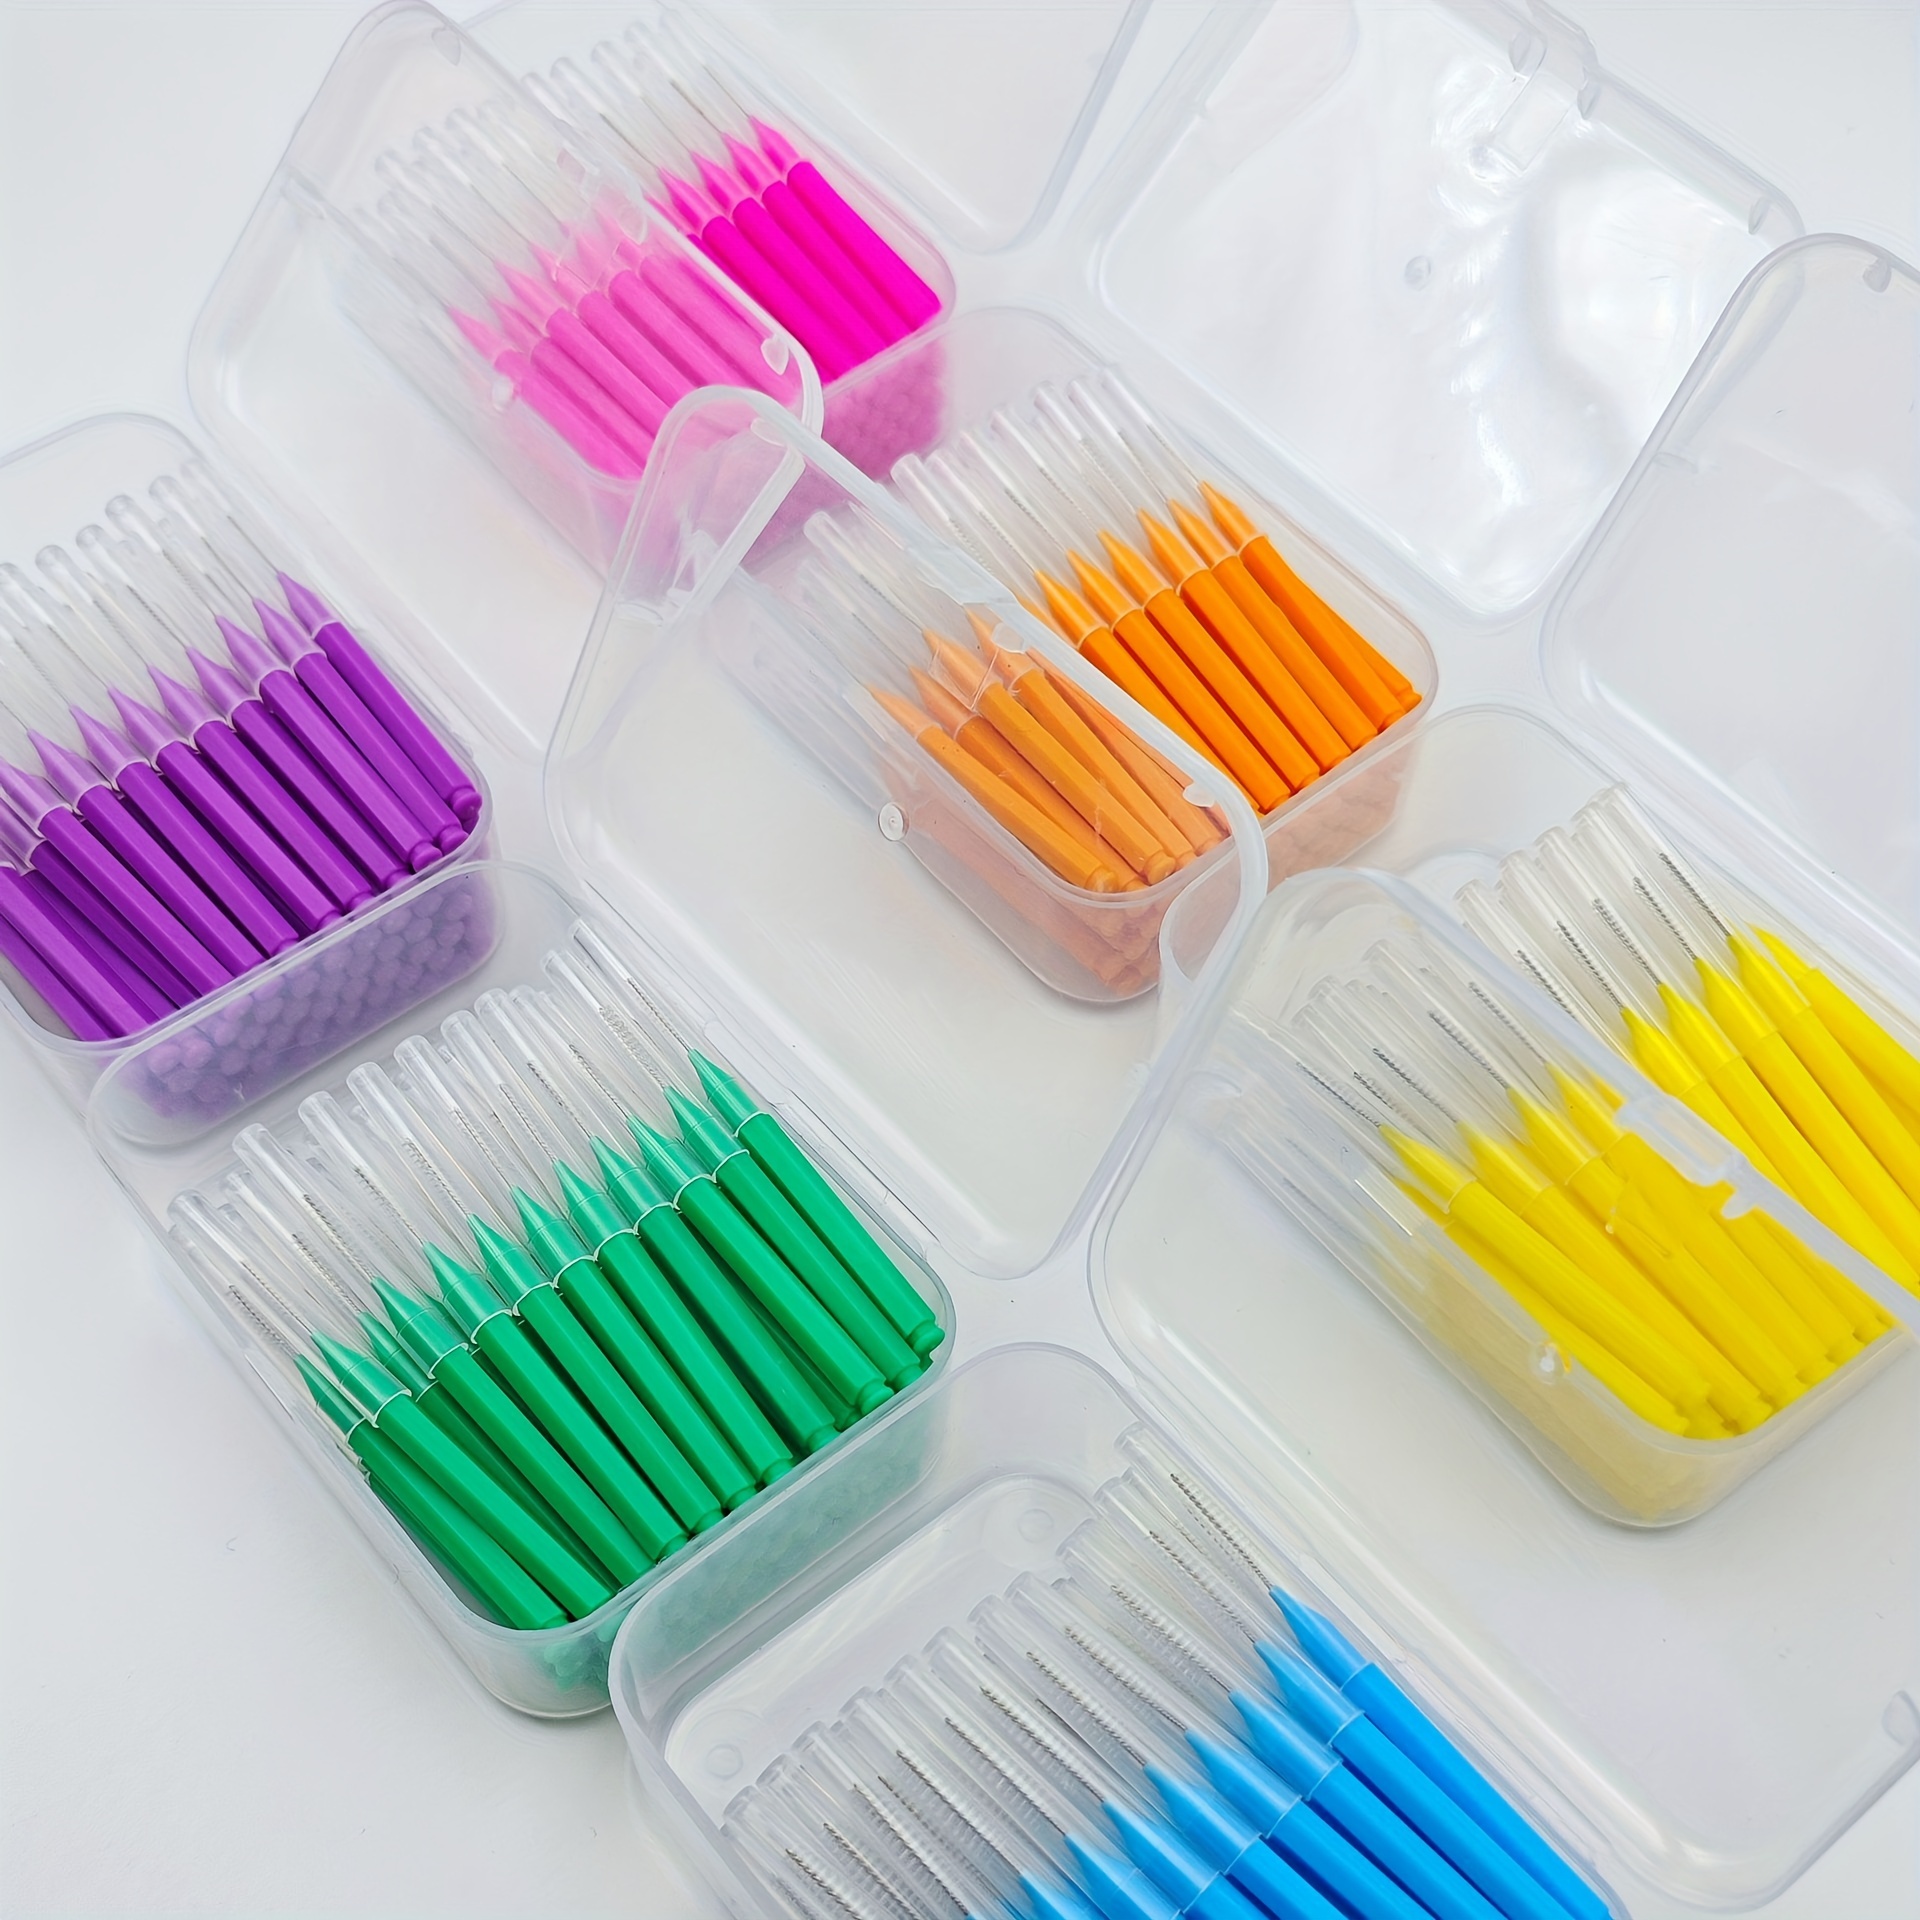 

Hexagonal Interdental Brushes, I-shaped Gap Cleaning Brushes, 60 Count Per Box, Multi-colored Oral Care Picks For Teeth Health, Easy Reach Tooth Space Cleaners Travel Must Have